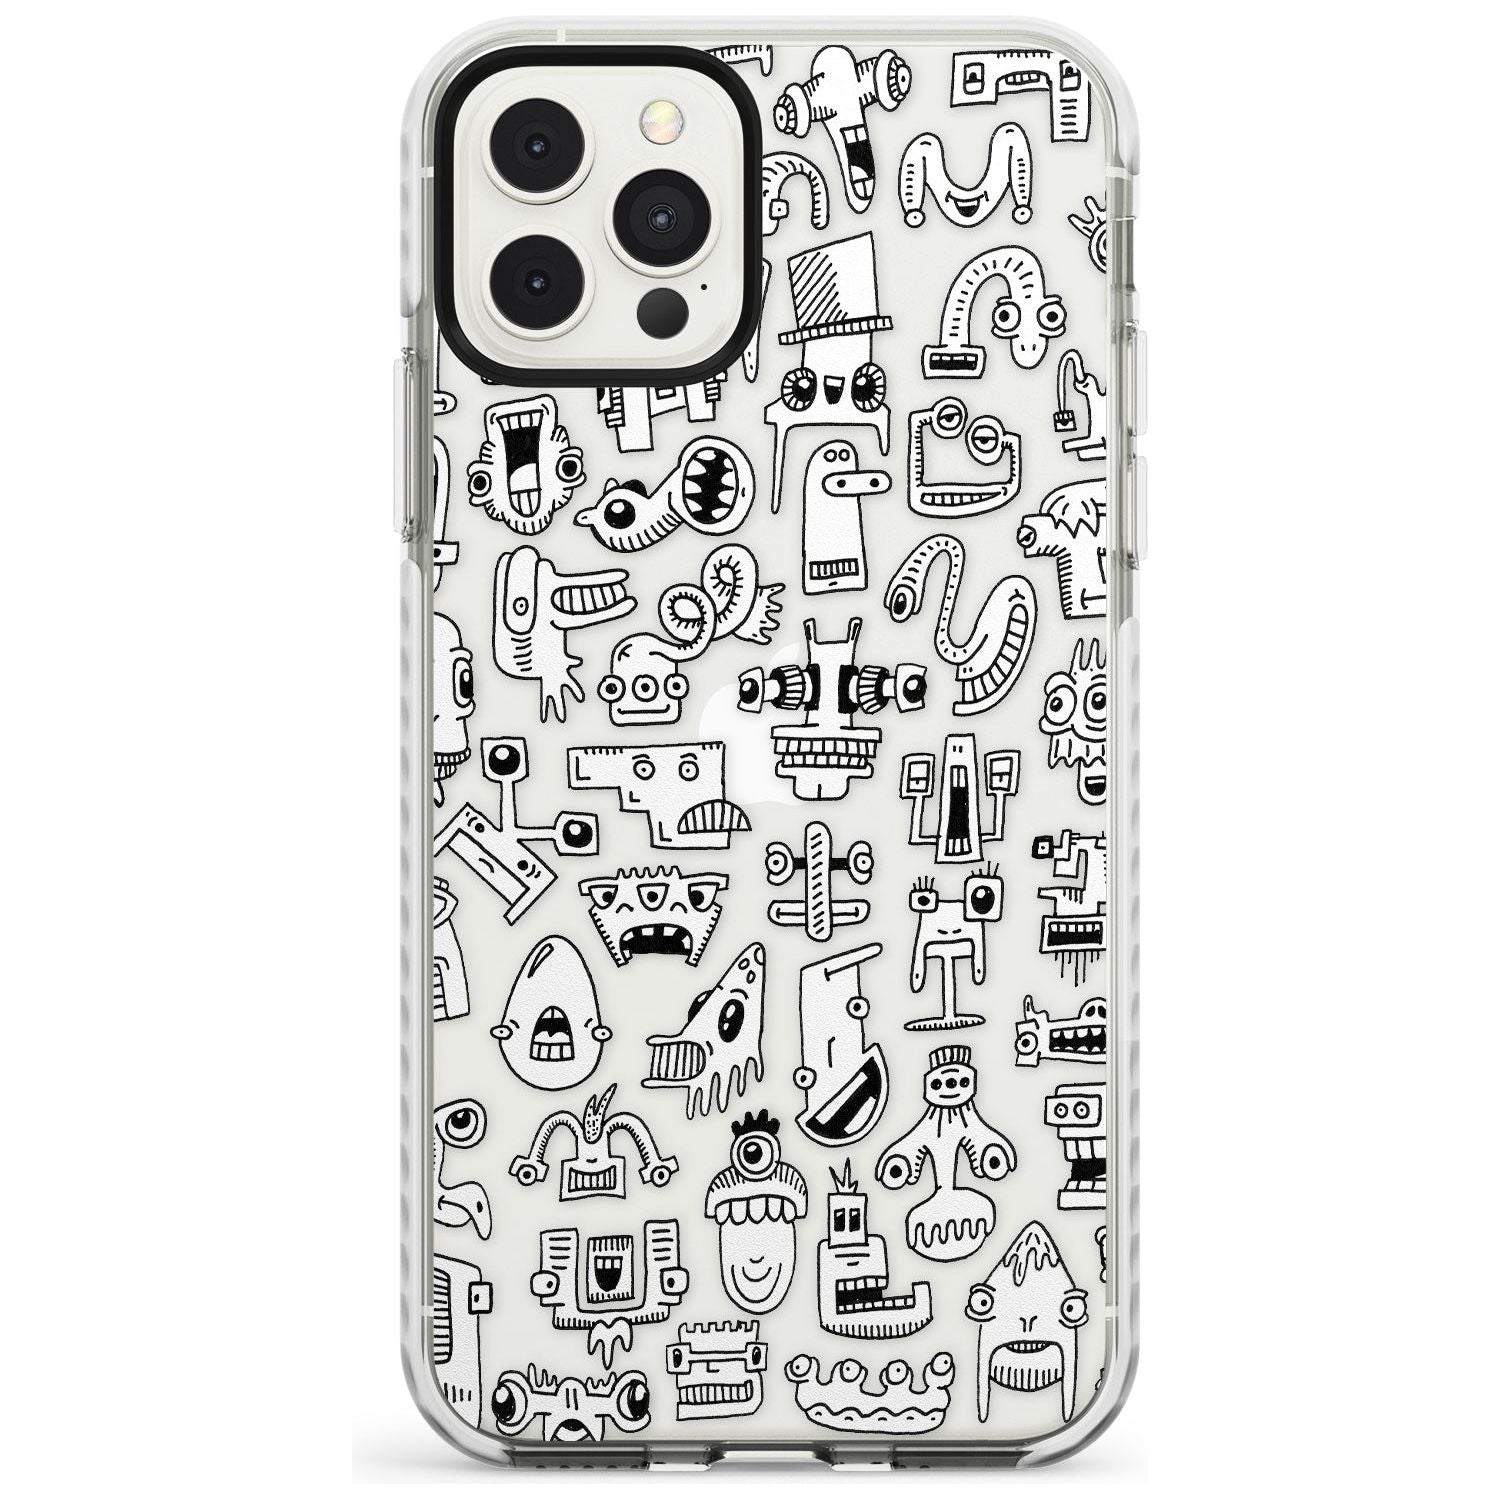 Weird Friends Impact Phone Case for iPhone 11 Pro Max